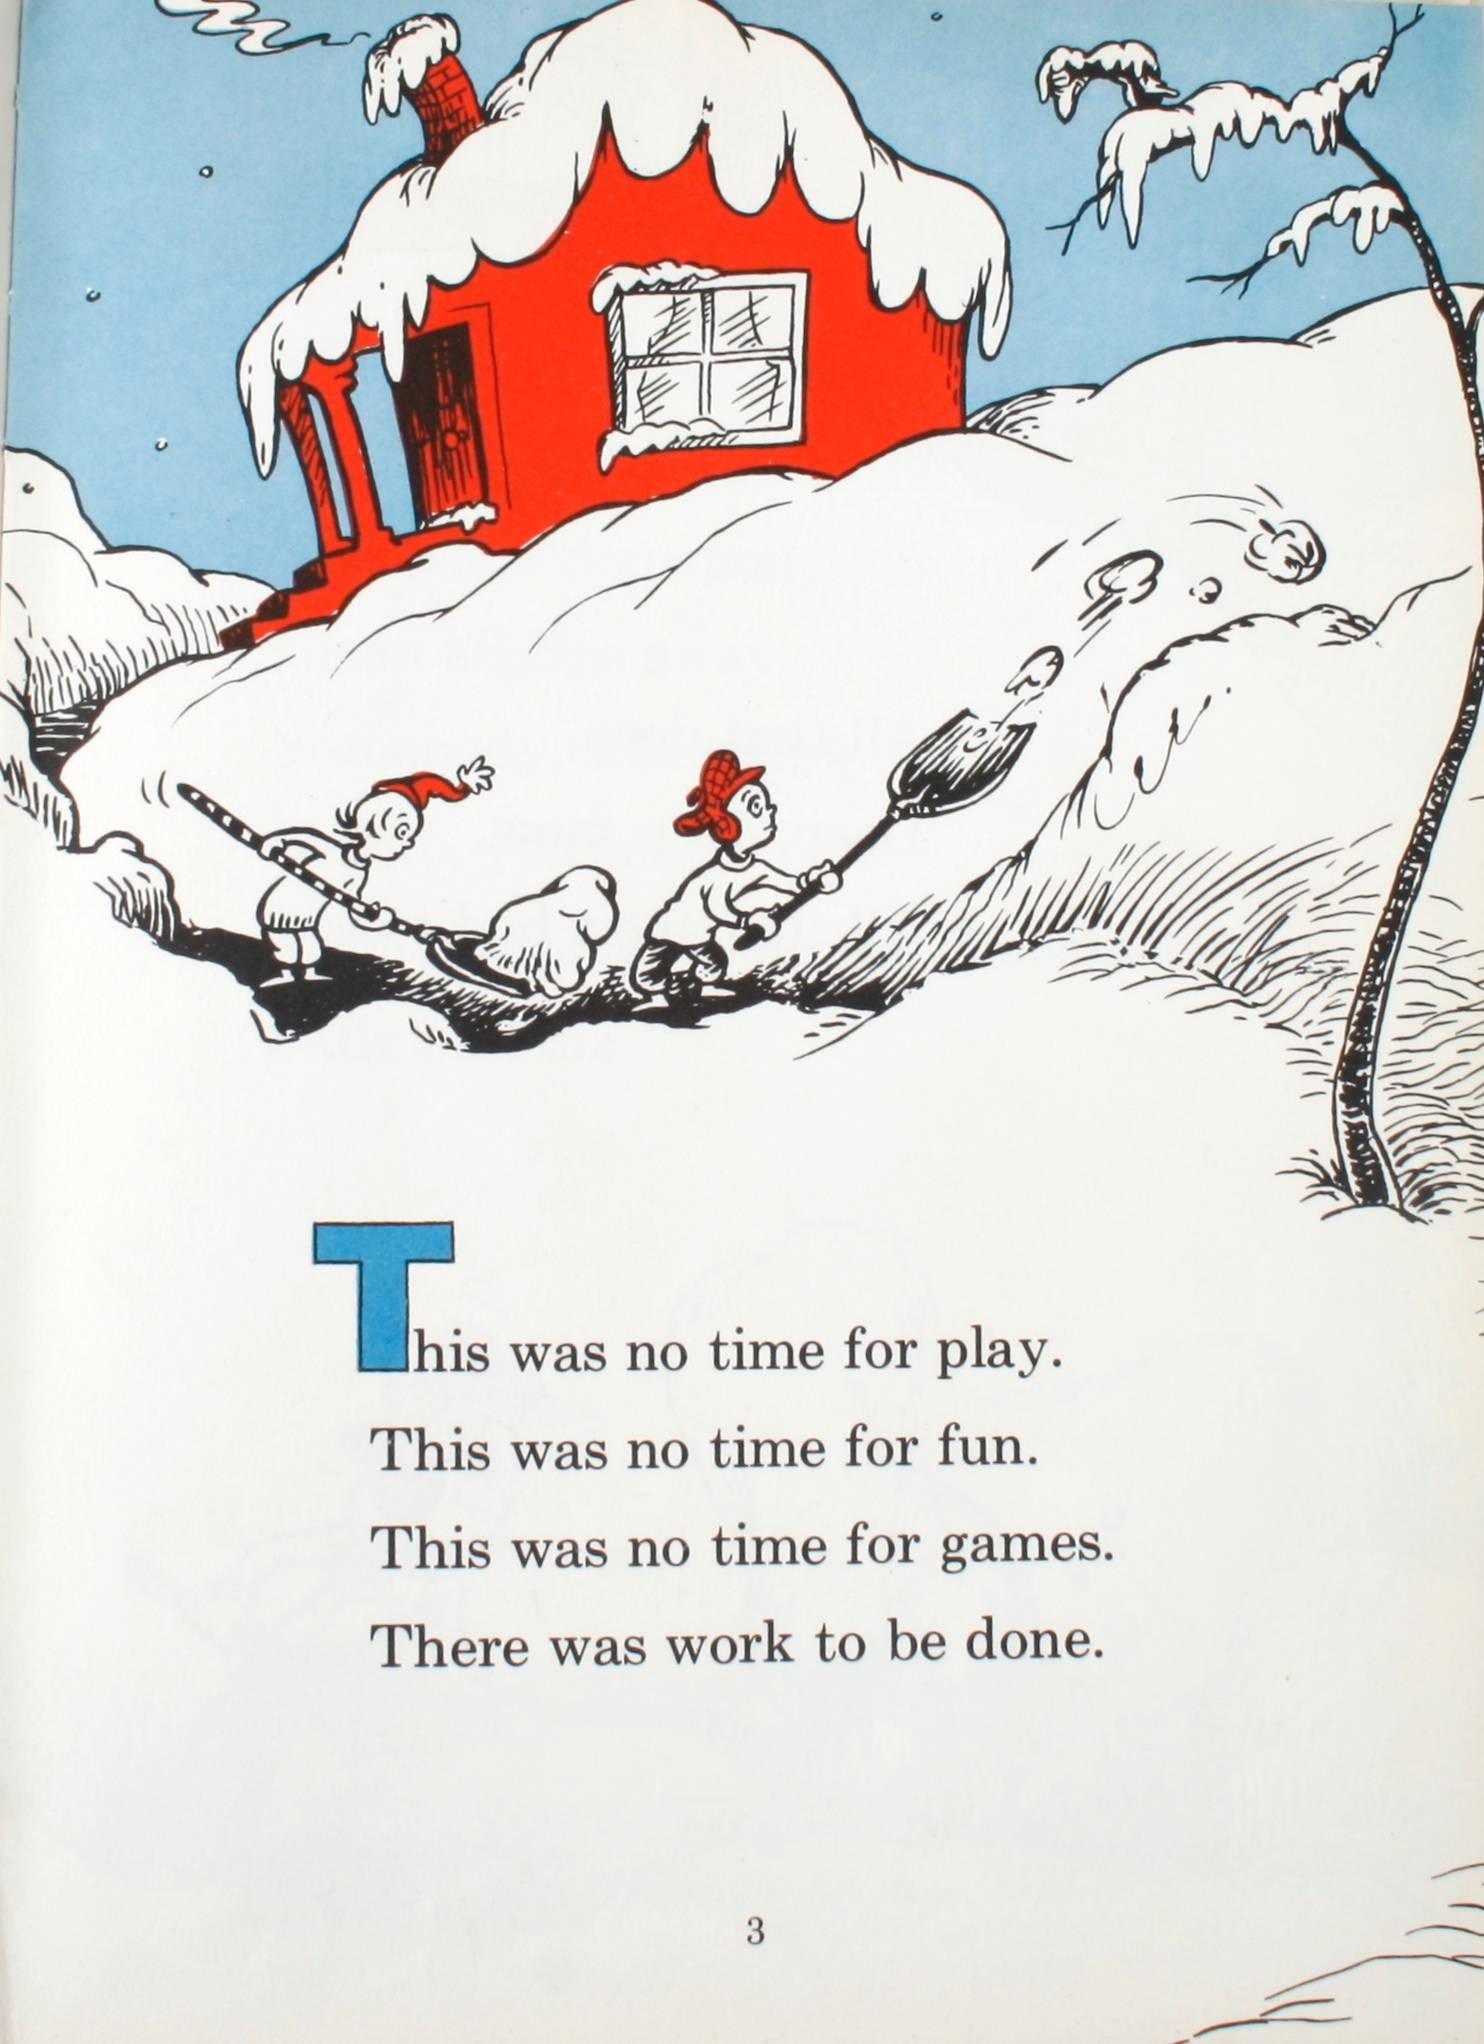 The Cat in the Hat Comes Back by Dr. Seuss. Random House, NY, 1958. Stated first printing hardcover no dust jacket. With all first edition issue points: Stated first printing, Cat's tie is white, snowball to left of cat's tail, all pages in color,